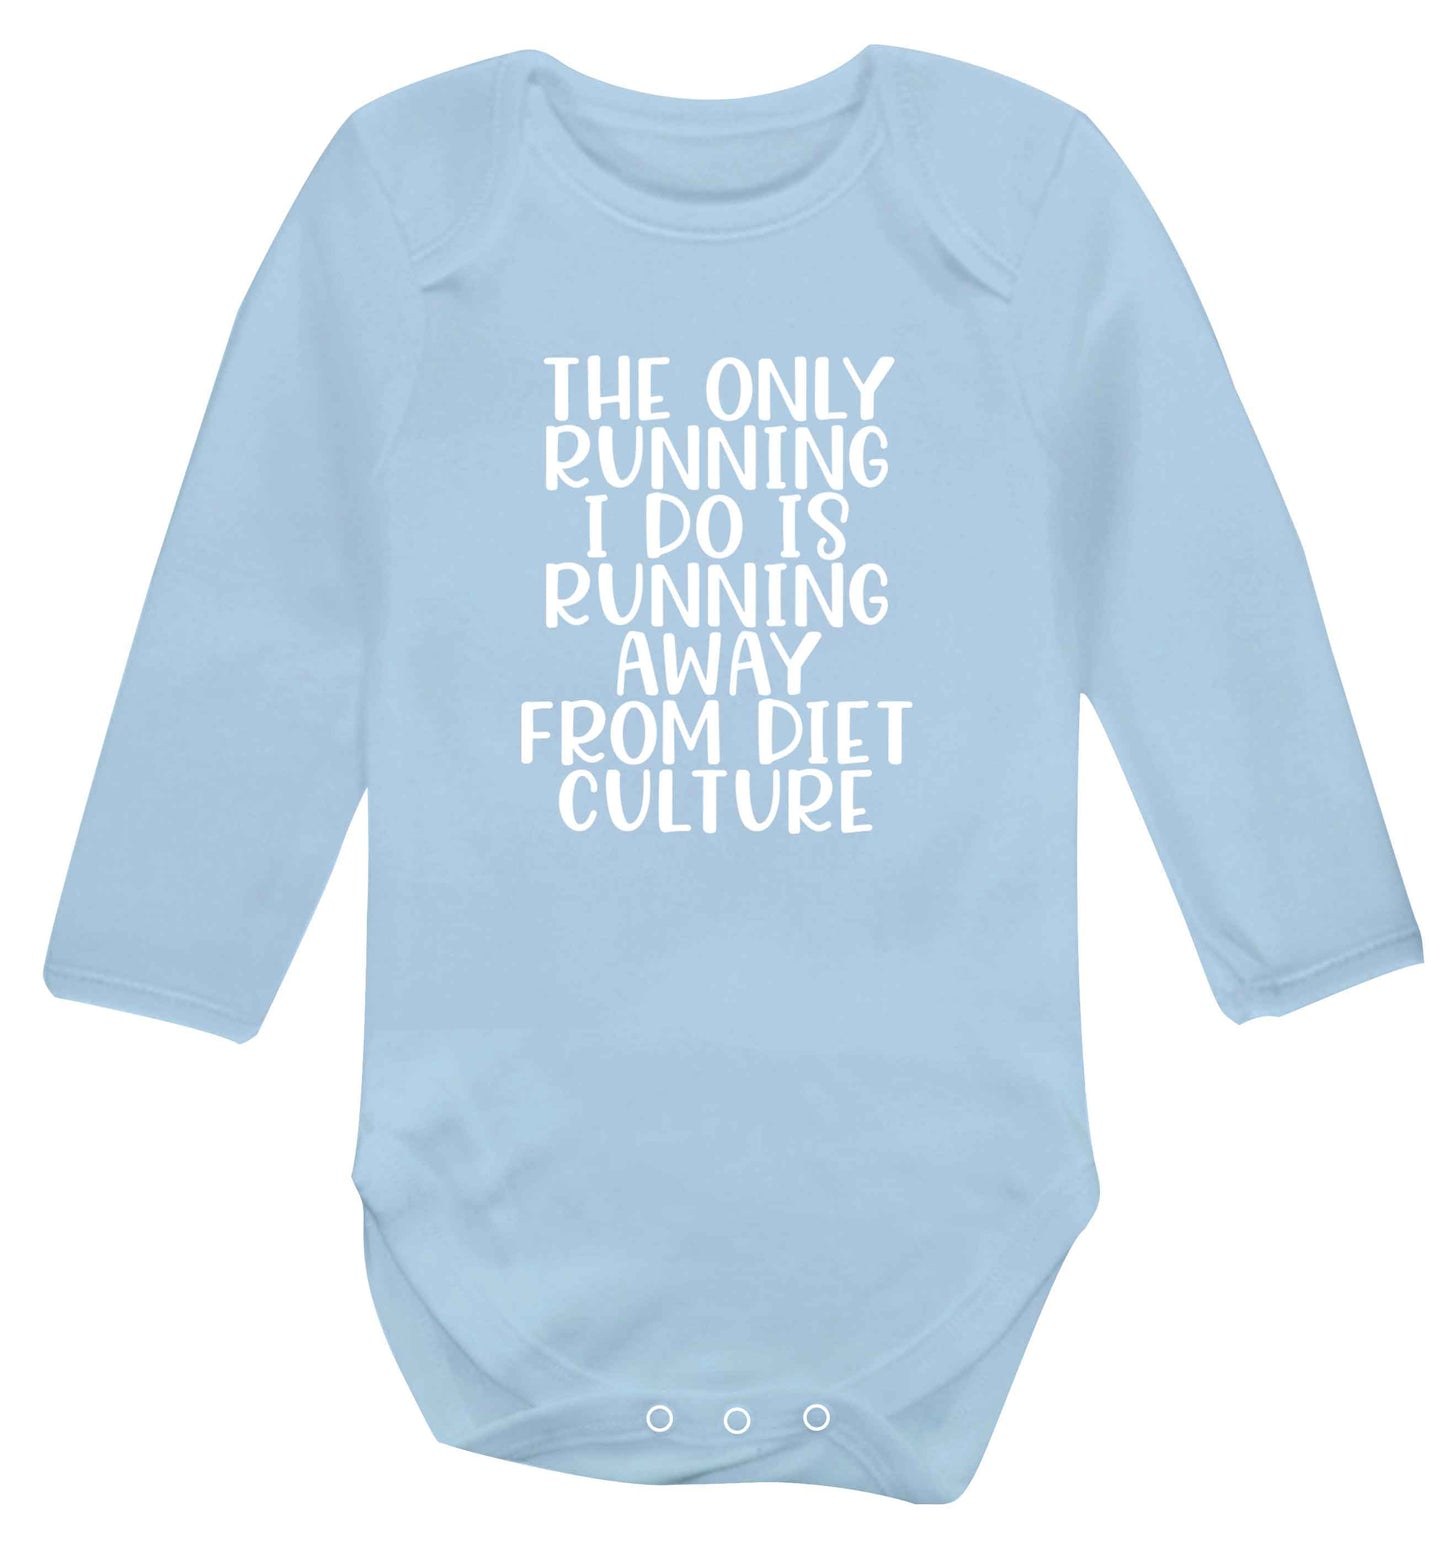 The only running I do is running away from diet culture baby vest long sleeved pale blue 6-12 months